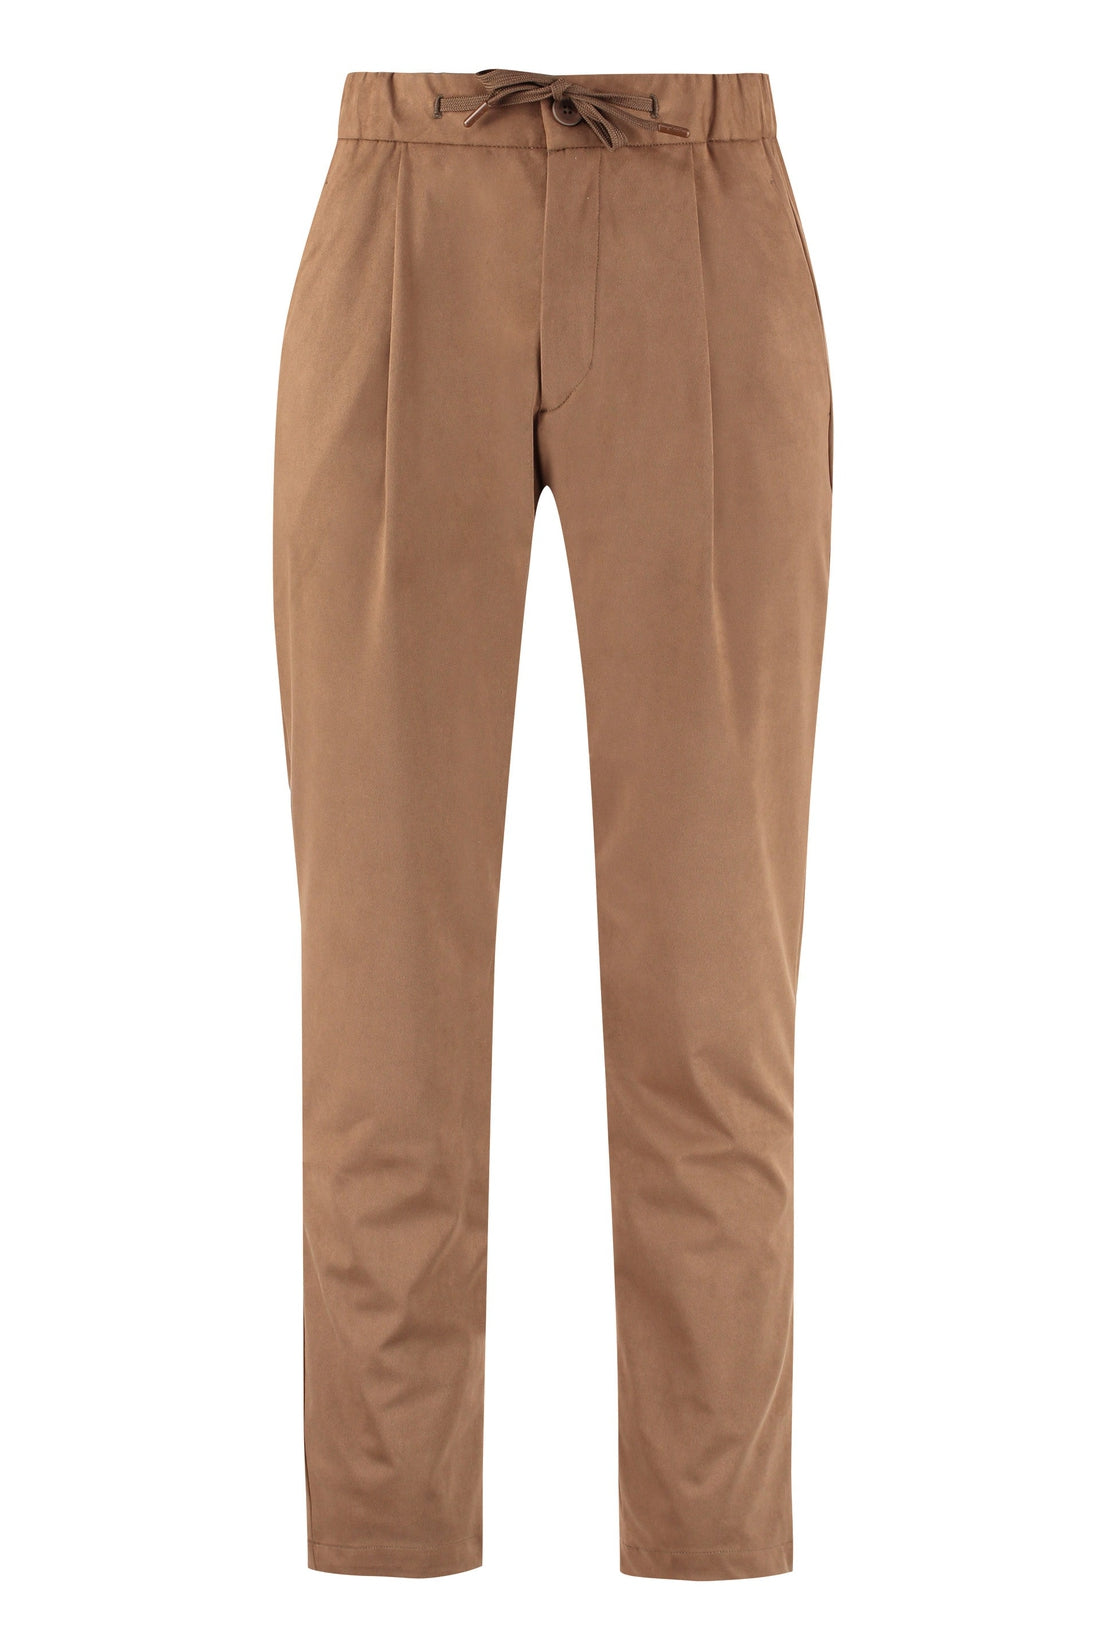 Herno-OUTLET-SALE-Eco-suede trousers-ARCHIVIST